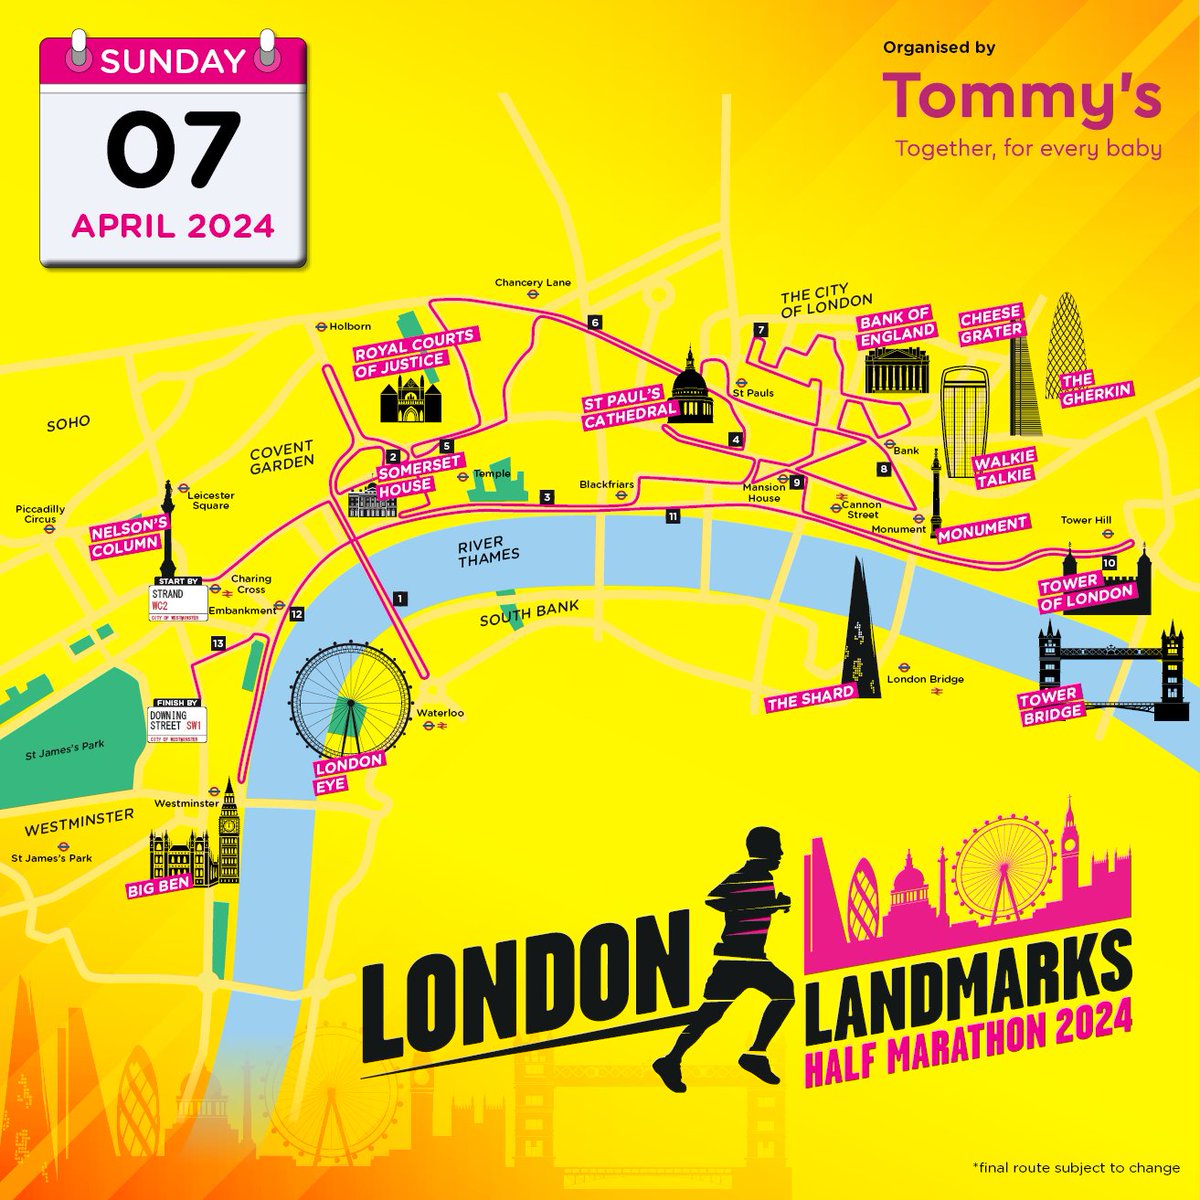 New Year...New Marathon? The London Landmarks is an event we always look forward to at Mind CHWF, and we're delighted to have tickets on offer to anyone interested in getting their running shoes on and doing some fundraising in 2024 ⬇️⬇️ mindchwf.org.uk/london-landmar…